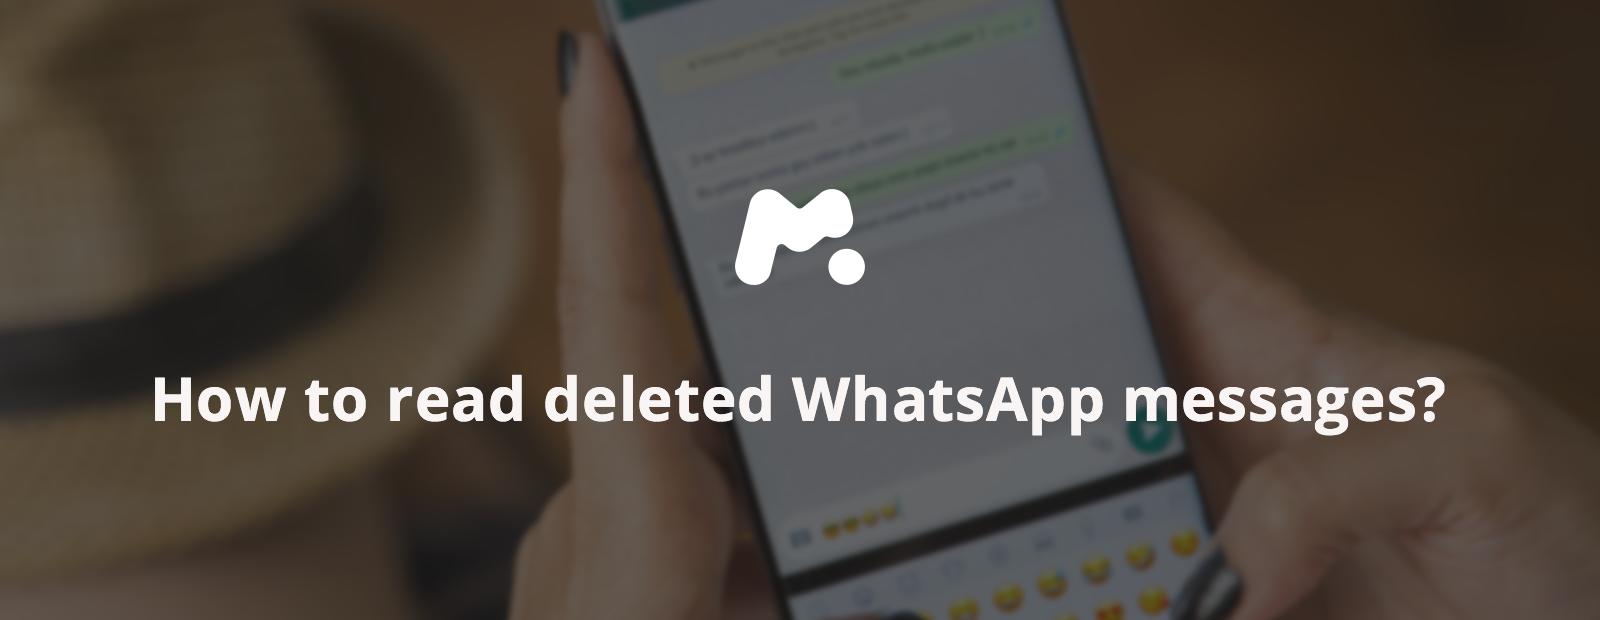 How to read deleted WhatsApp messages?